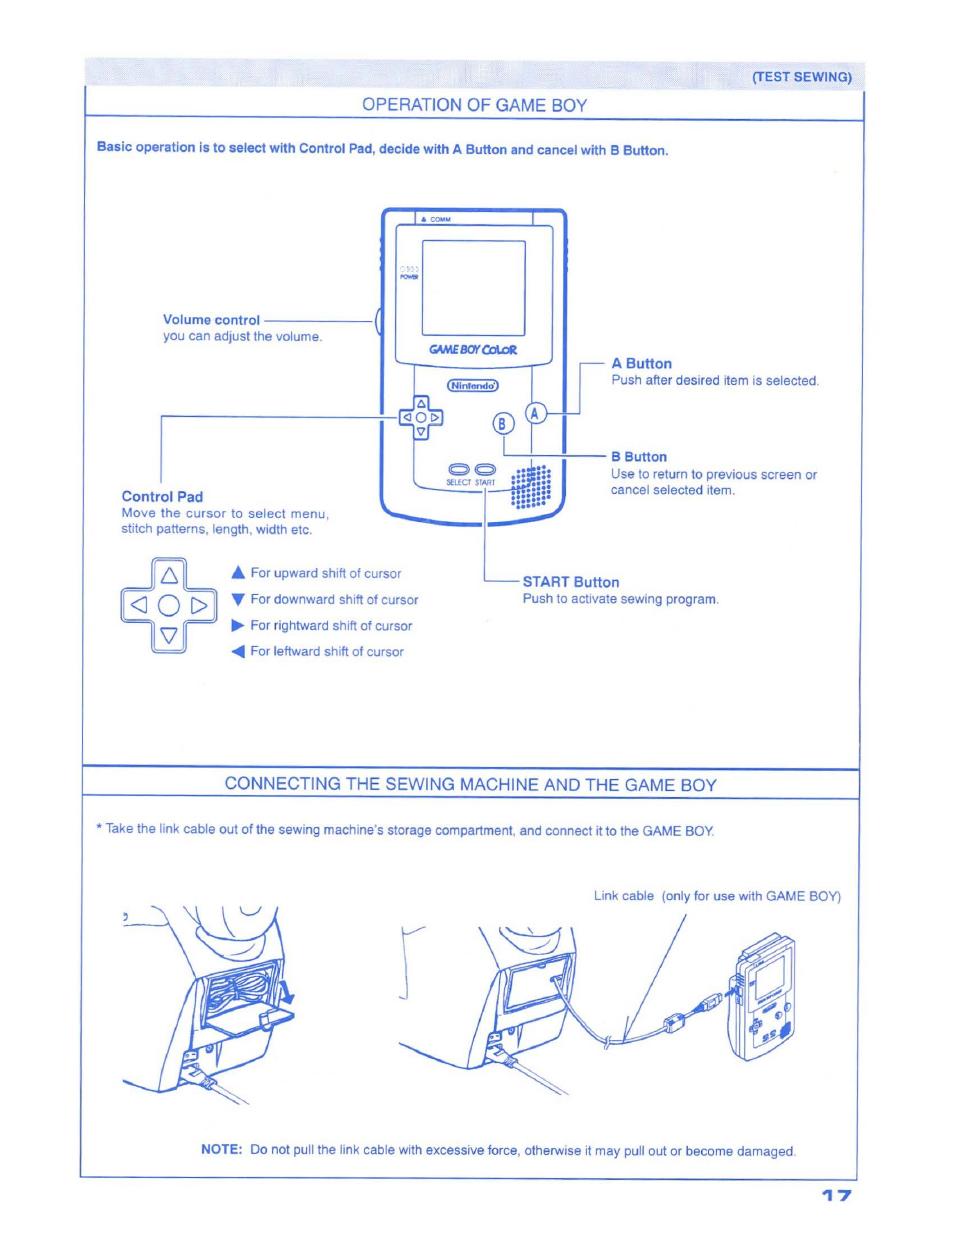 Operation of game boy, Connecting the sewing machine and the game boy | SINGER 1500 Izek User Manual | Page 19 / 70